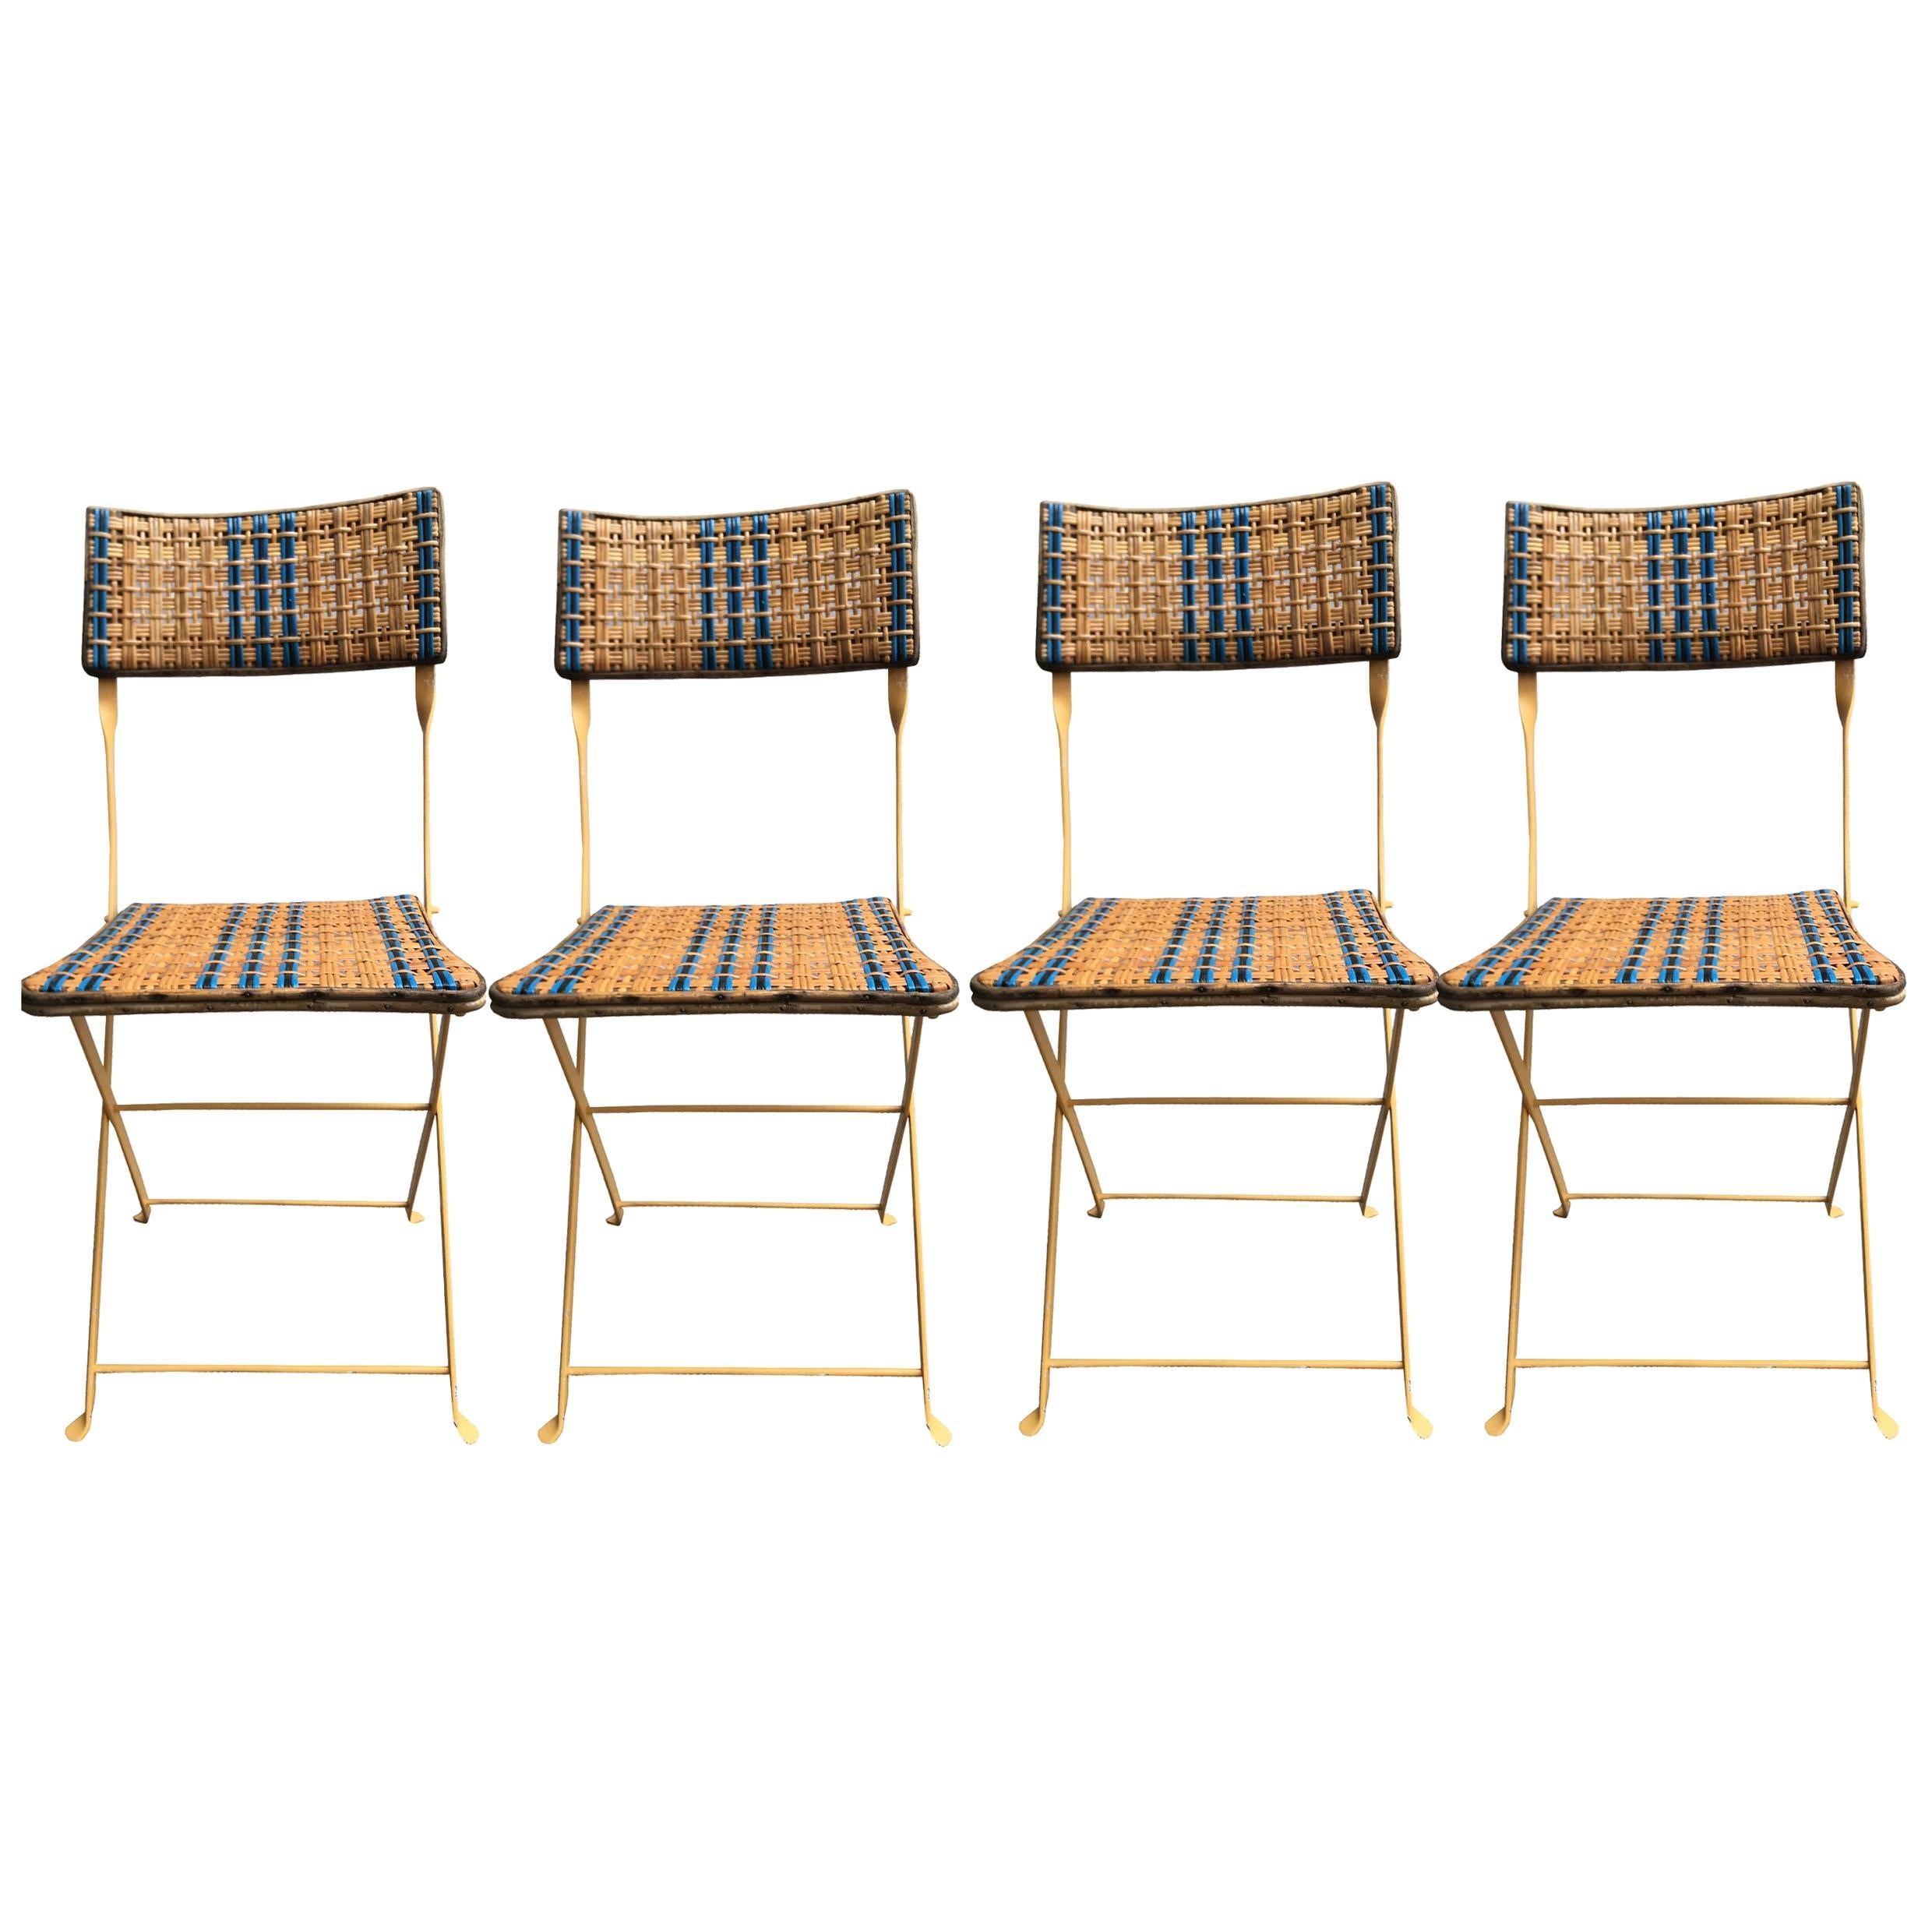 Four Foldable Garden Chairs in Rattan and Lacquered Iron For Sale